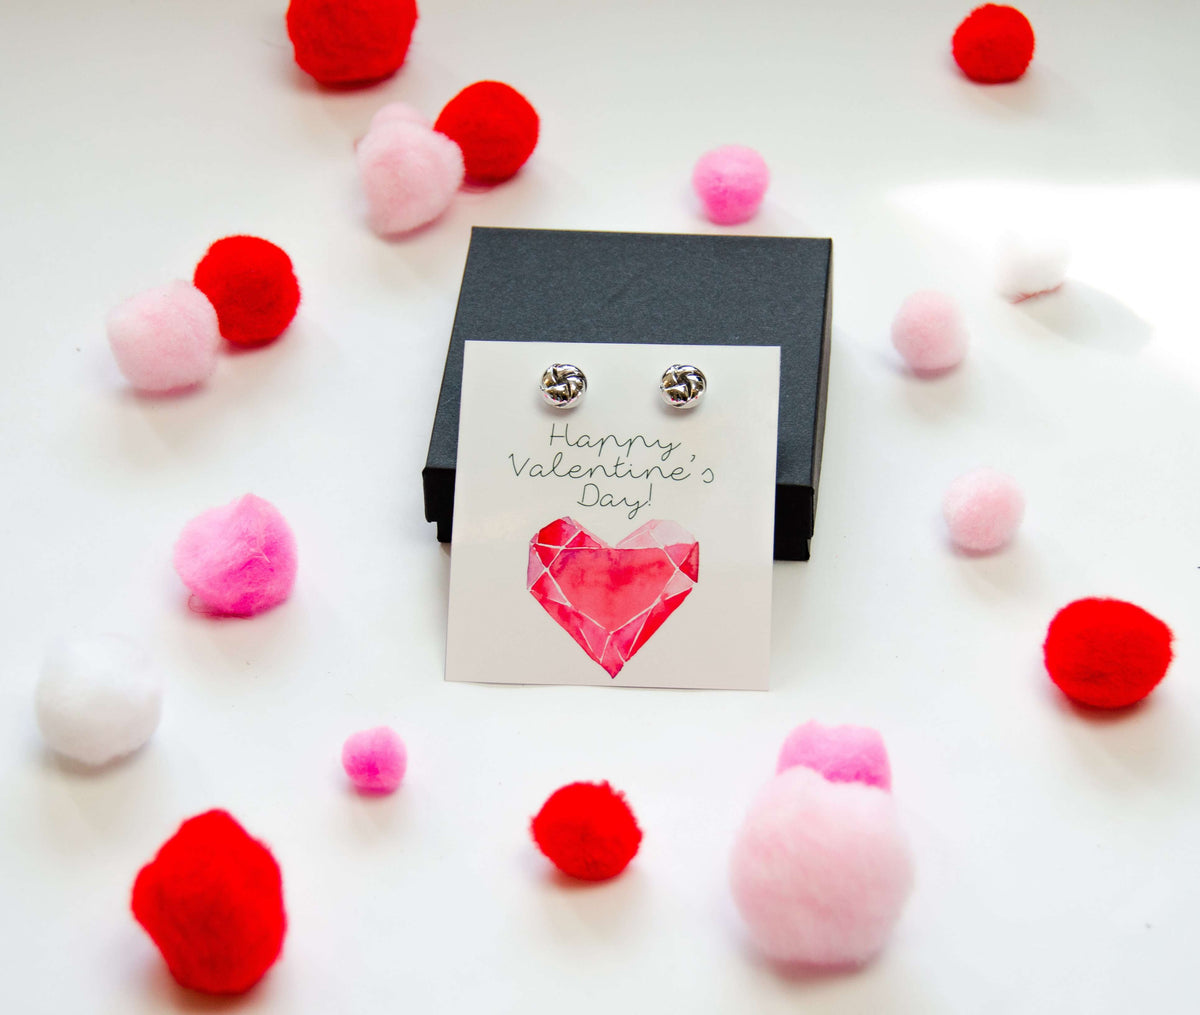 How to Make Valentine's Day Candy Earrings